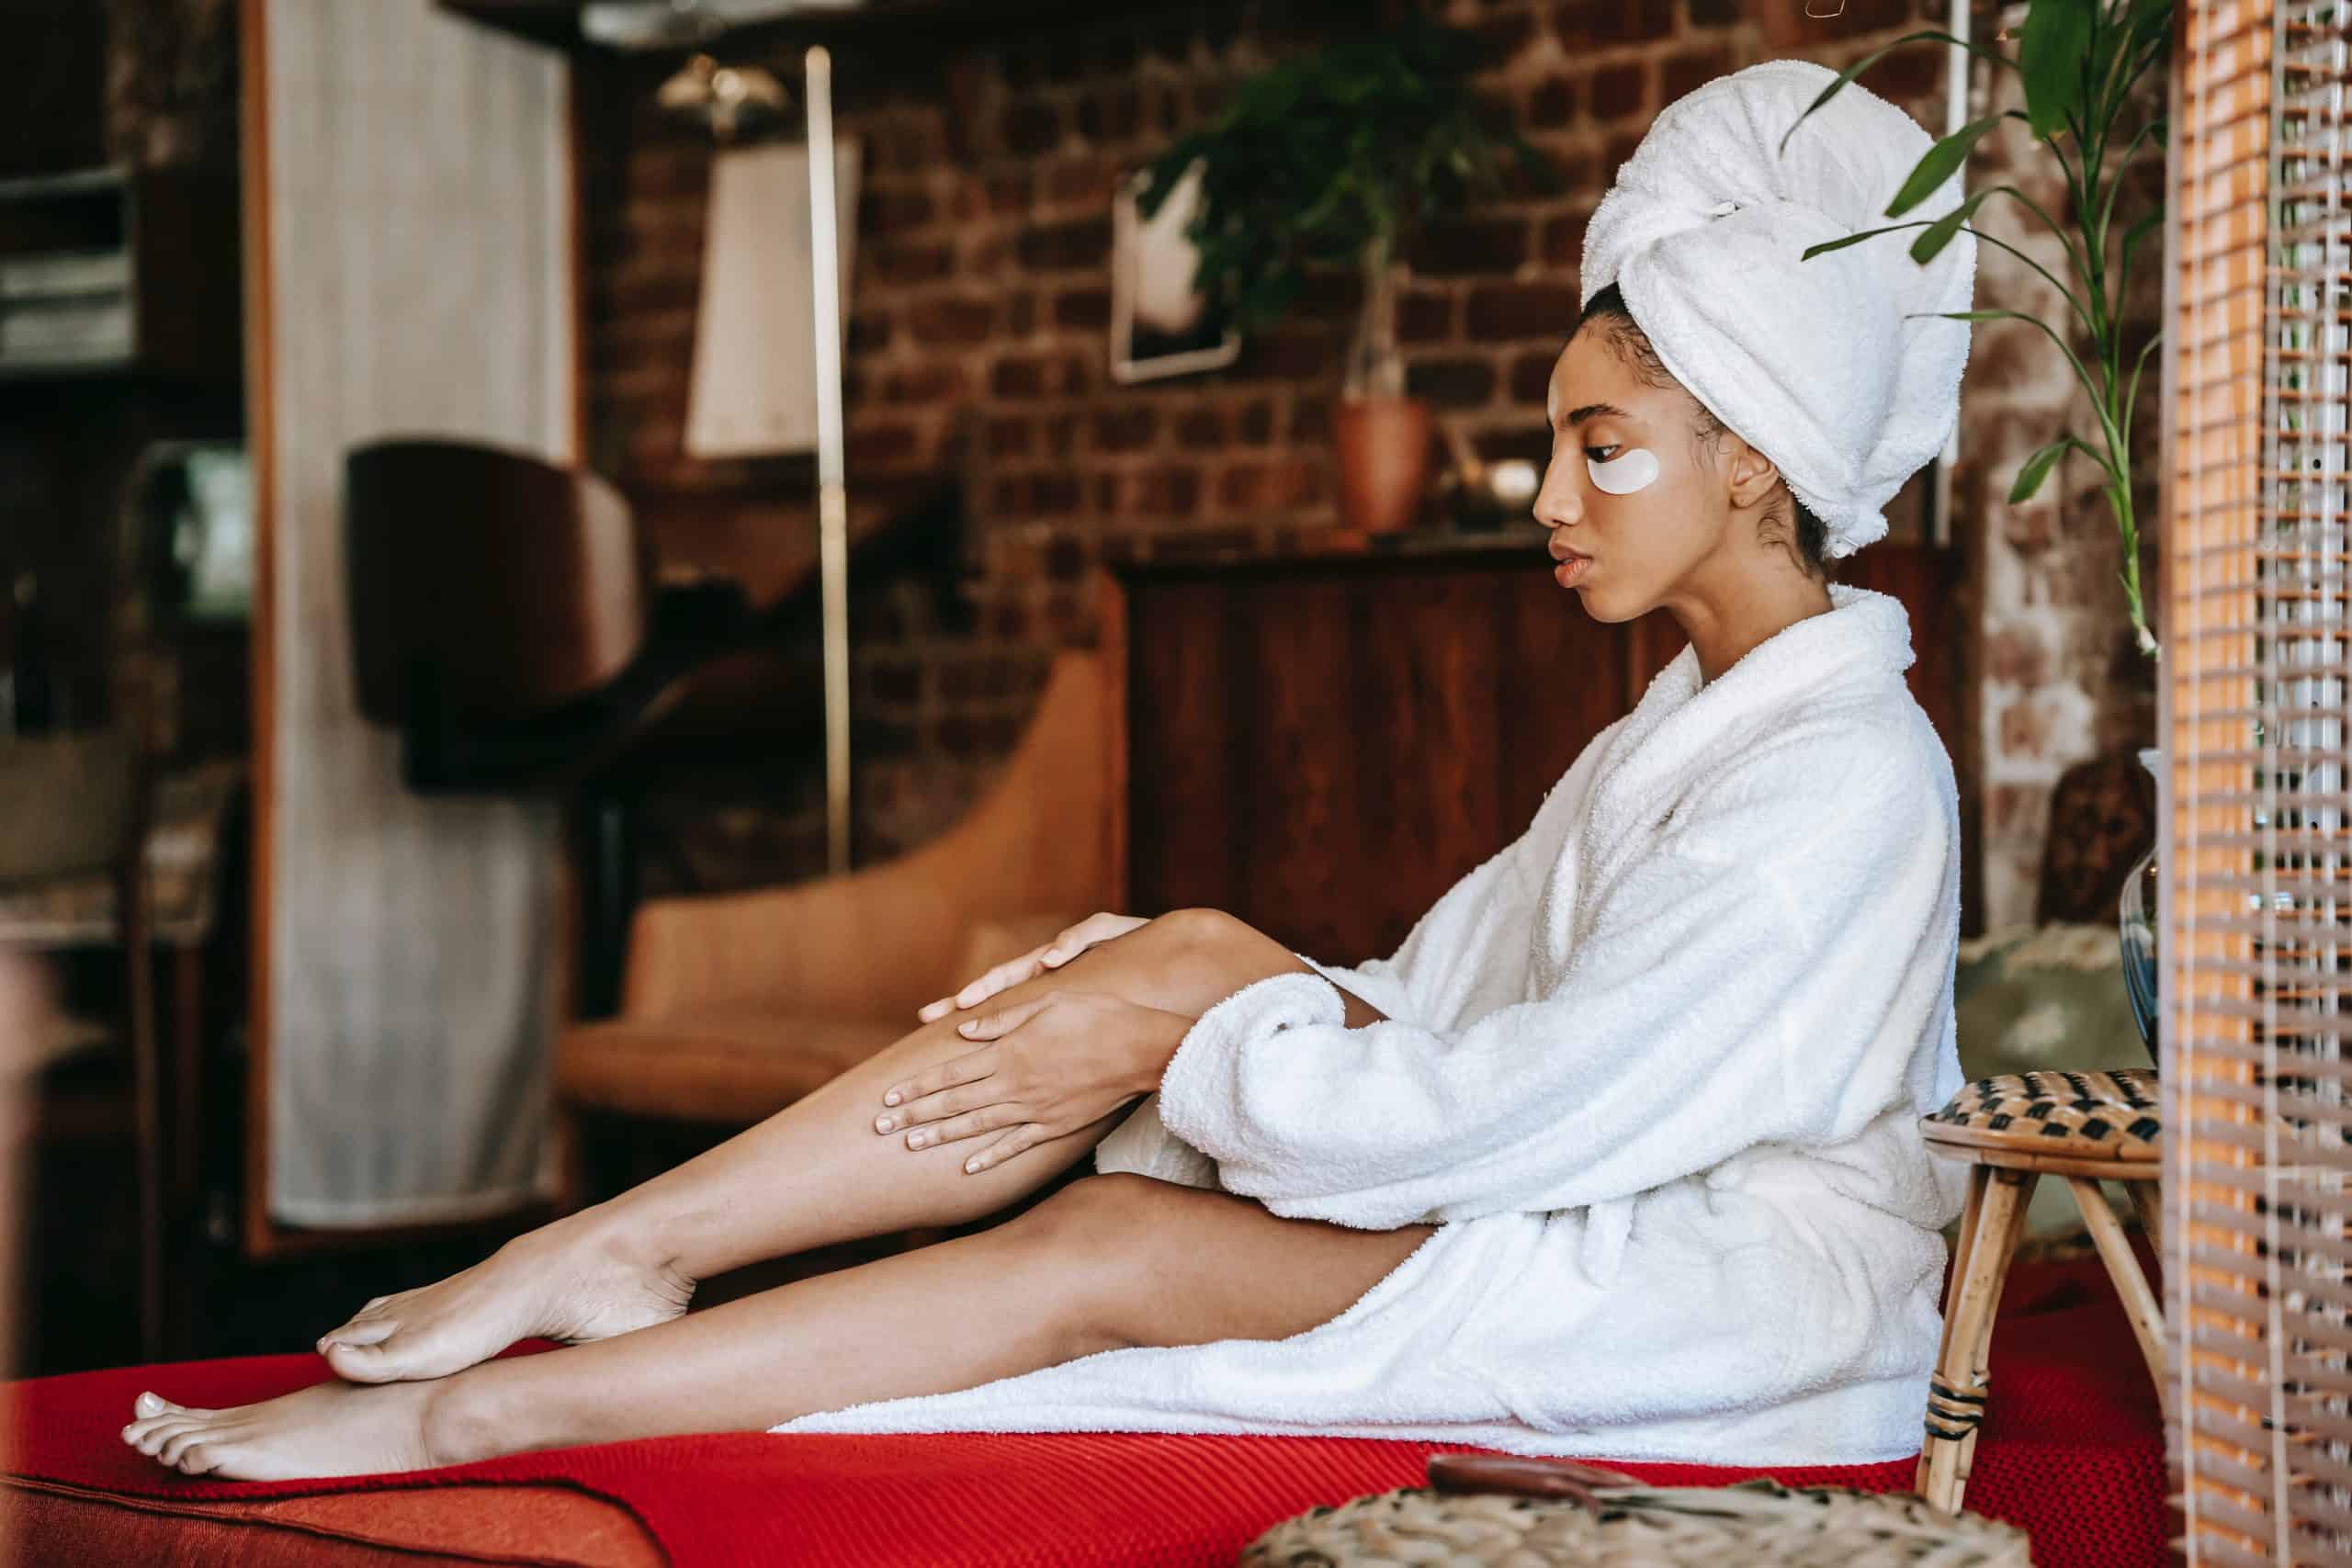 Tips for relaxing at a spa